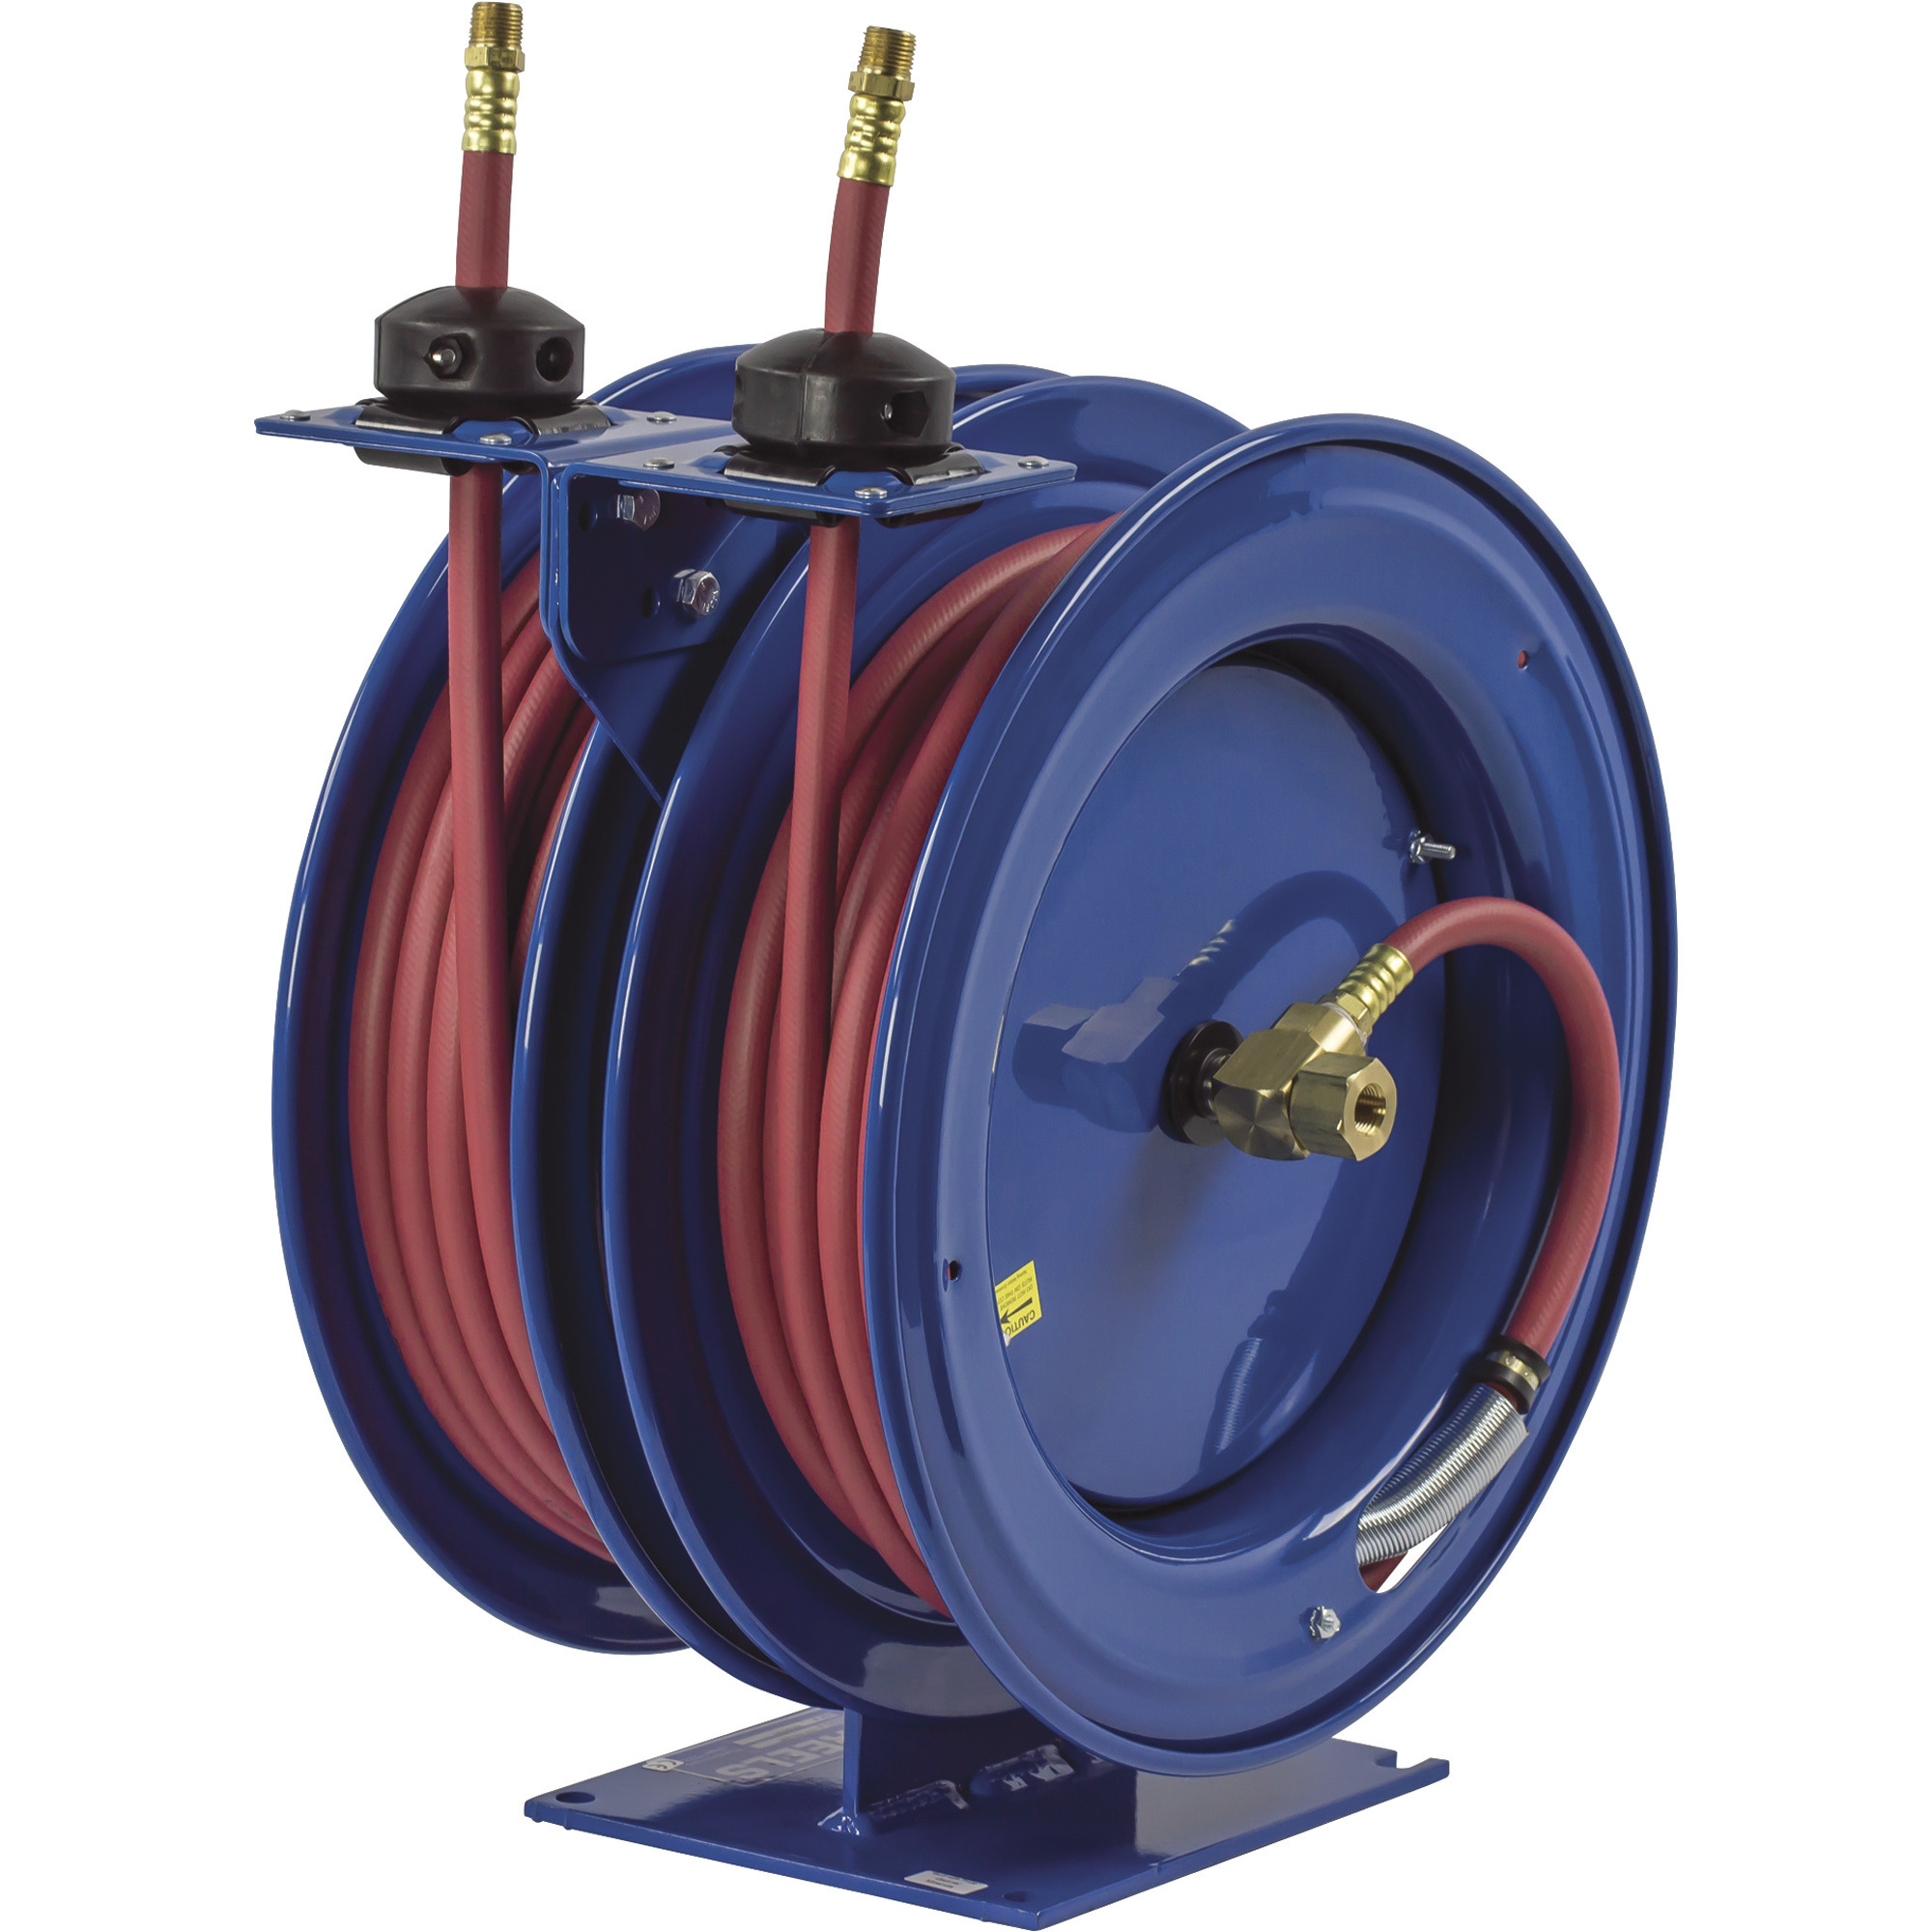 Coxreels Dual Air Hose Reel, With 1/4in. x 50ft. PVC Hoses, Max